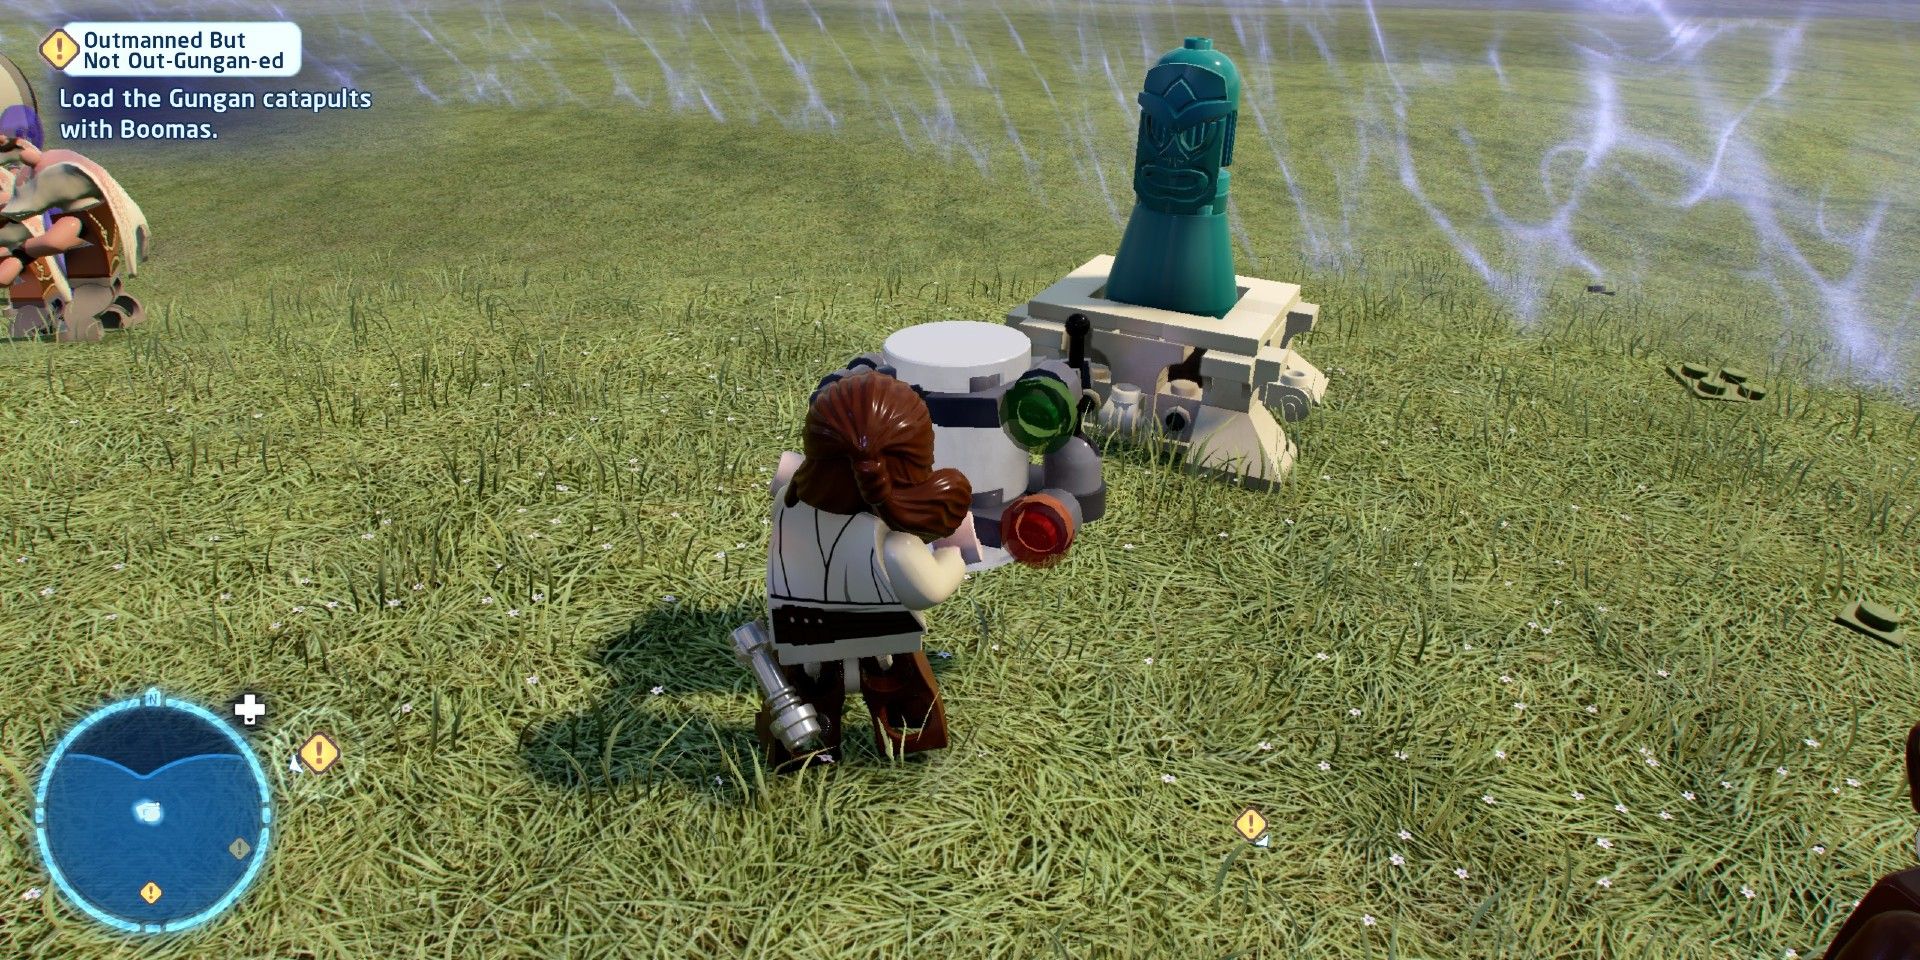 LEGO Star Wars Outmanned But Not Out Gungan Ed Minikits